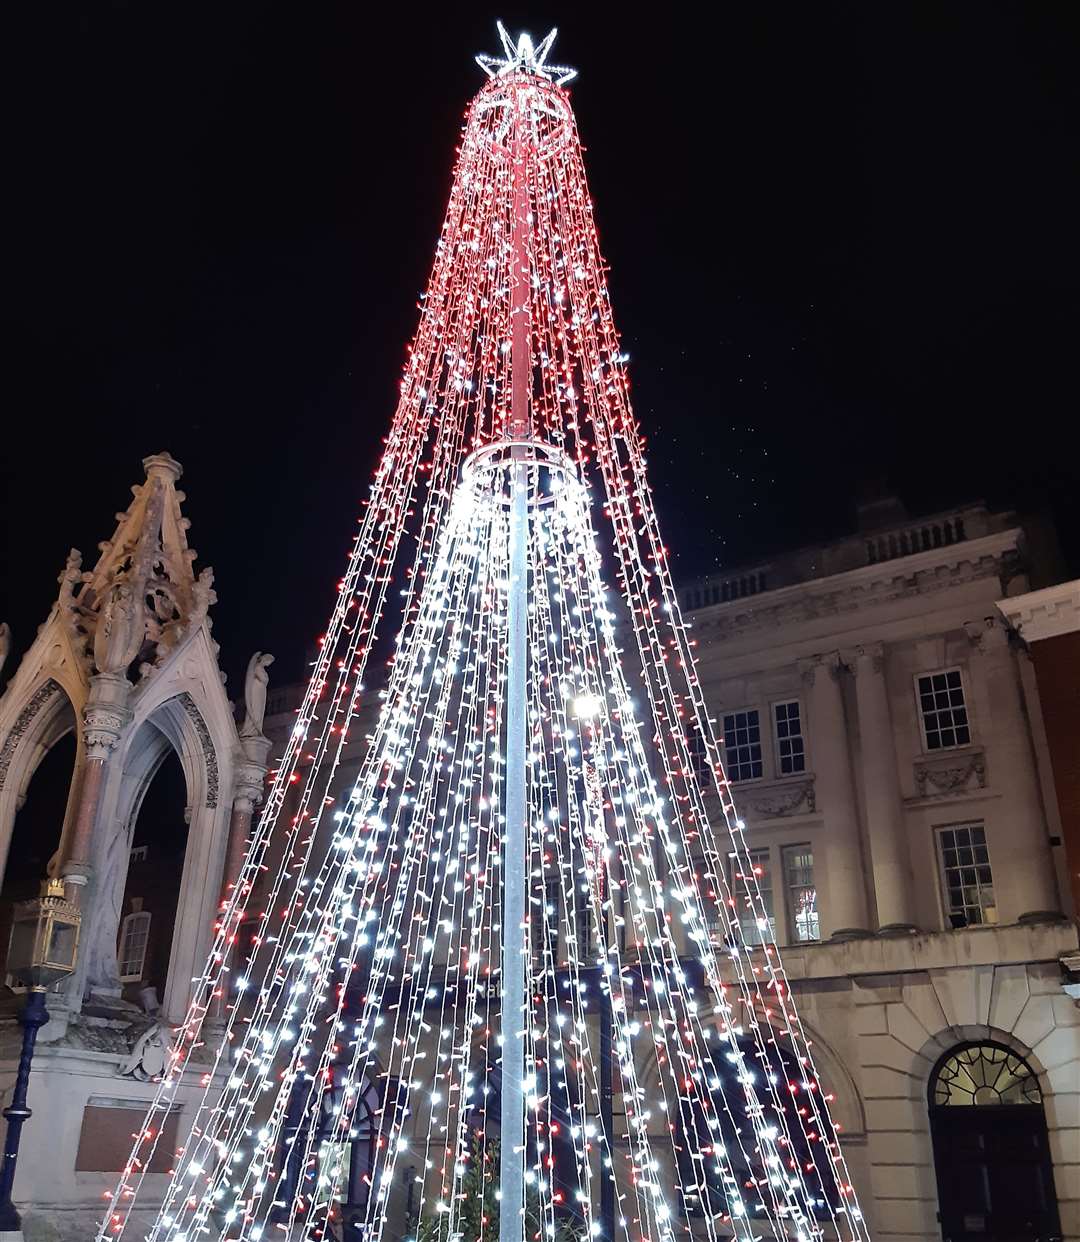 Maidstone's Christmas tree was siwtched on this evening, November 18